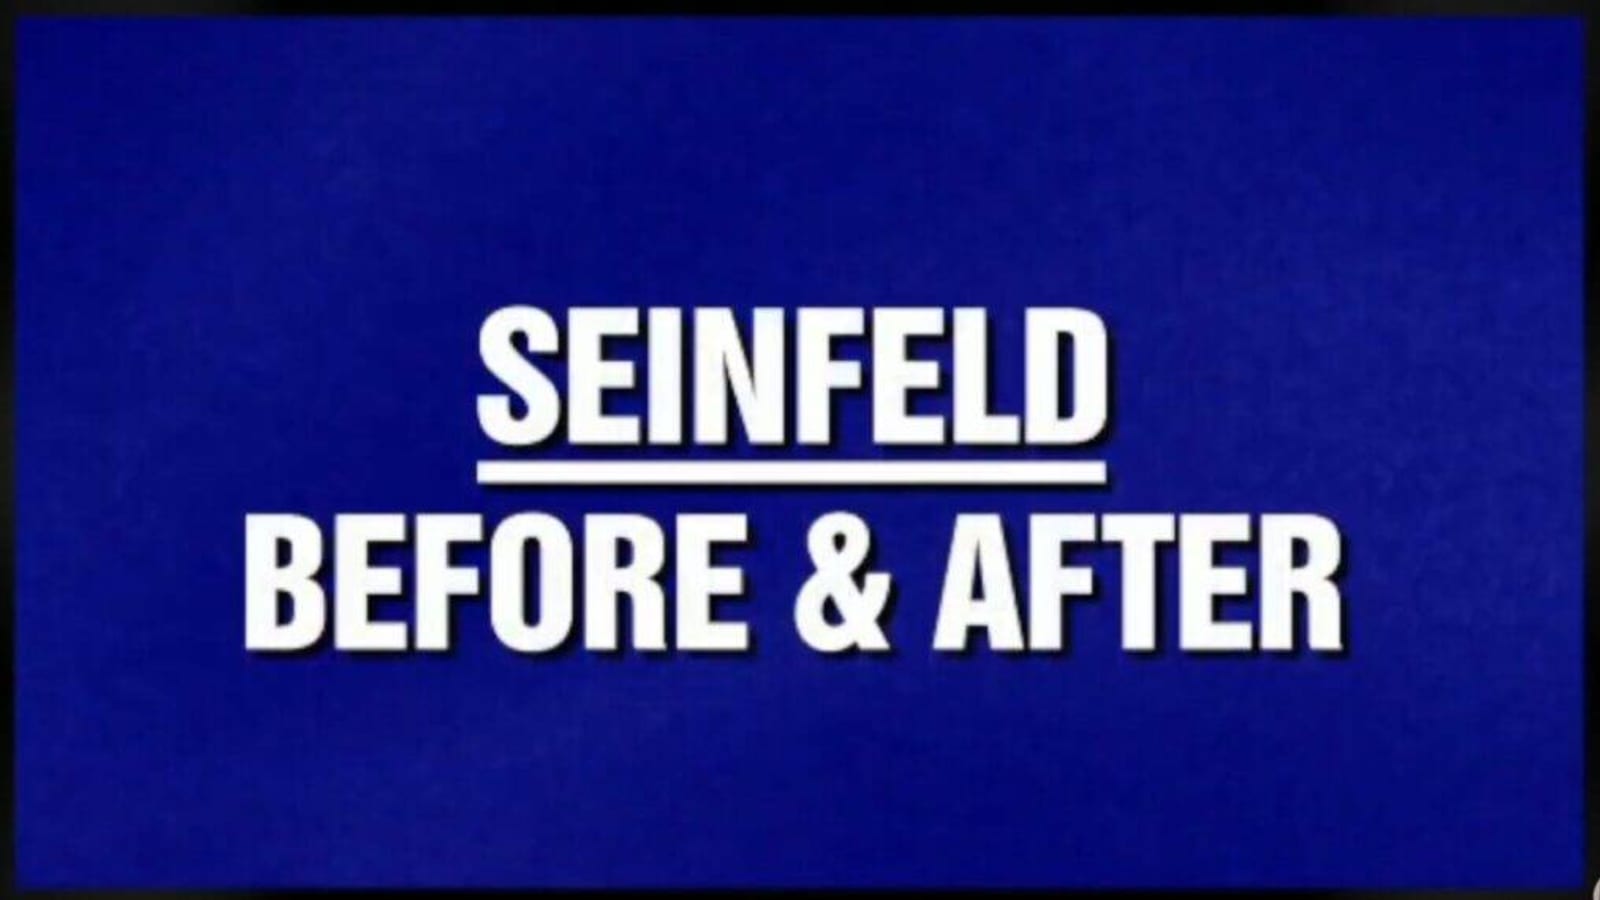 Jeopardy Fans Debate “Seinfeld Before & After” Category